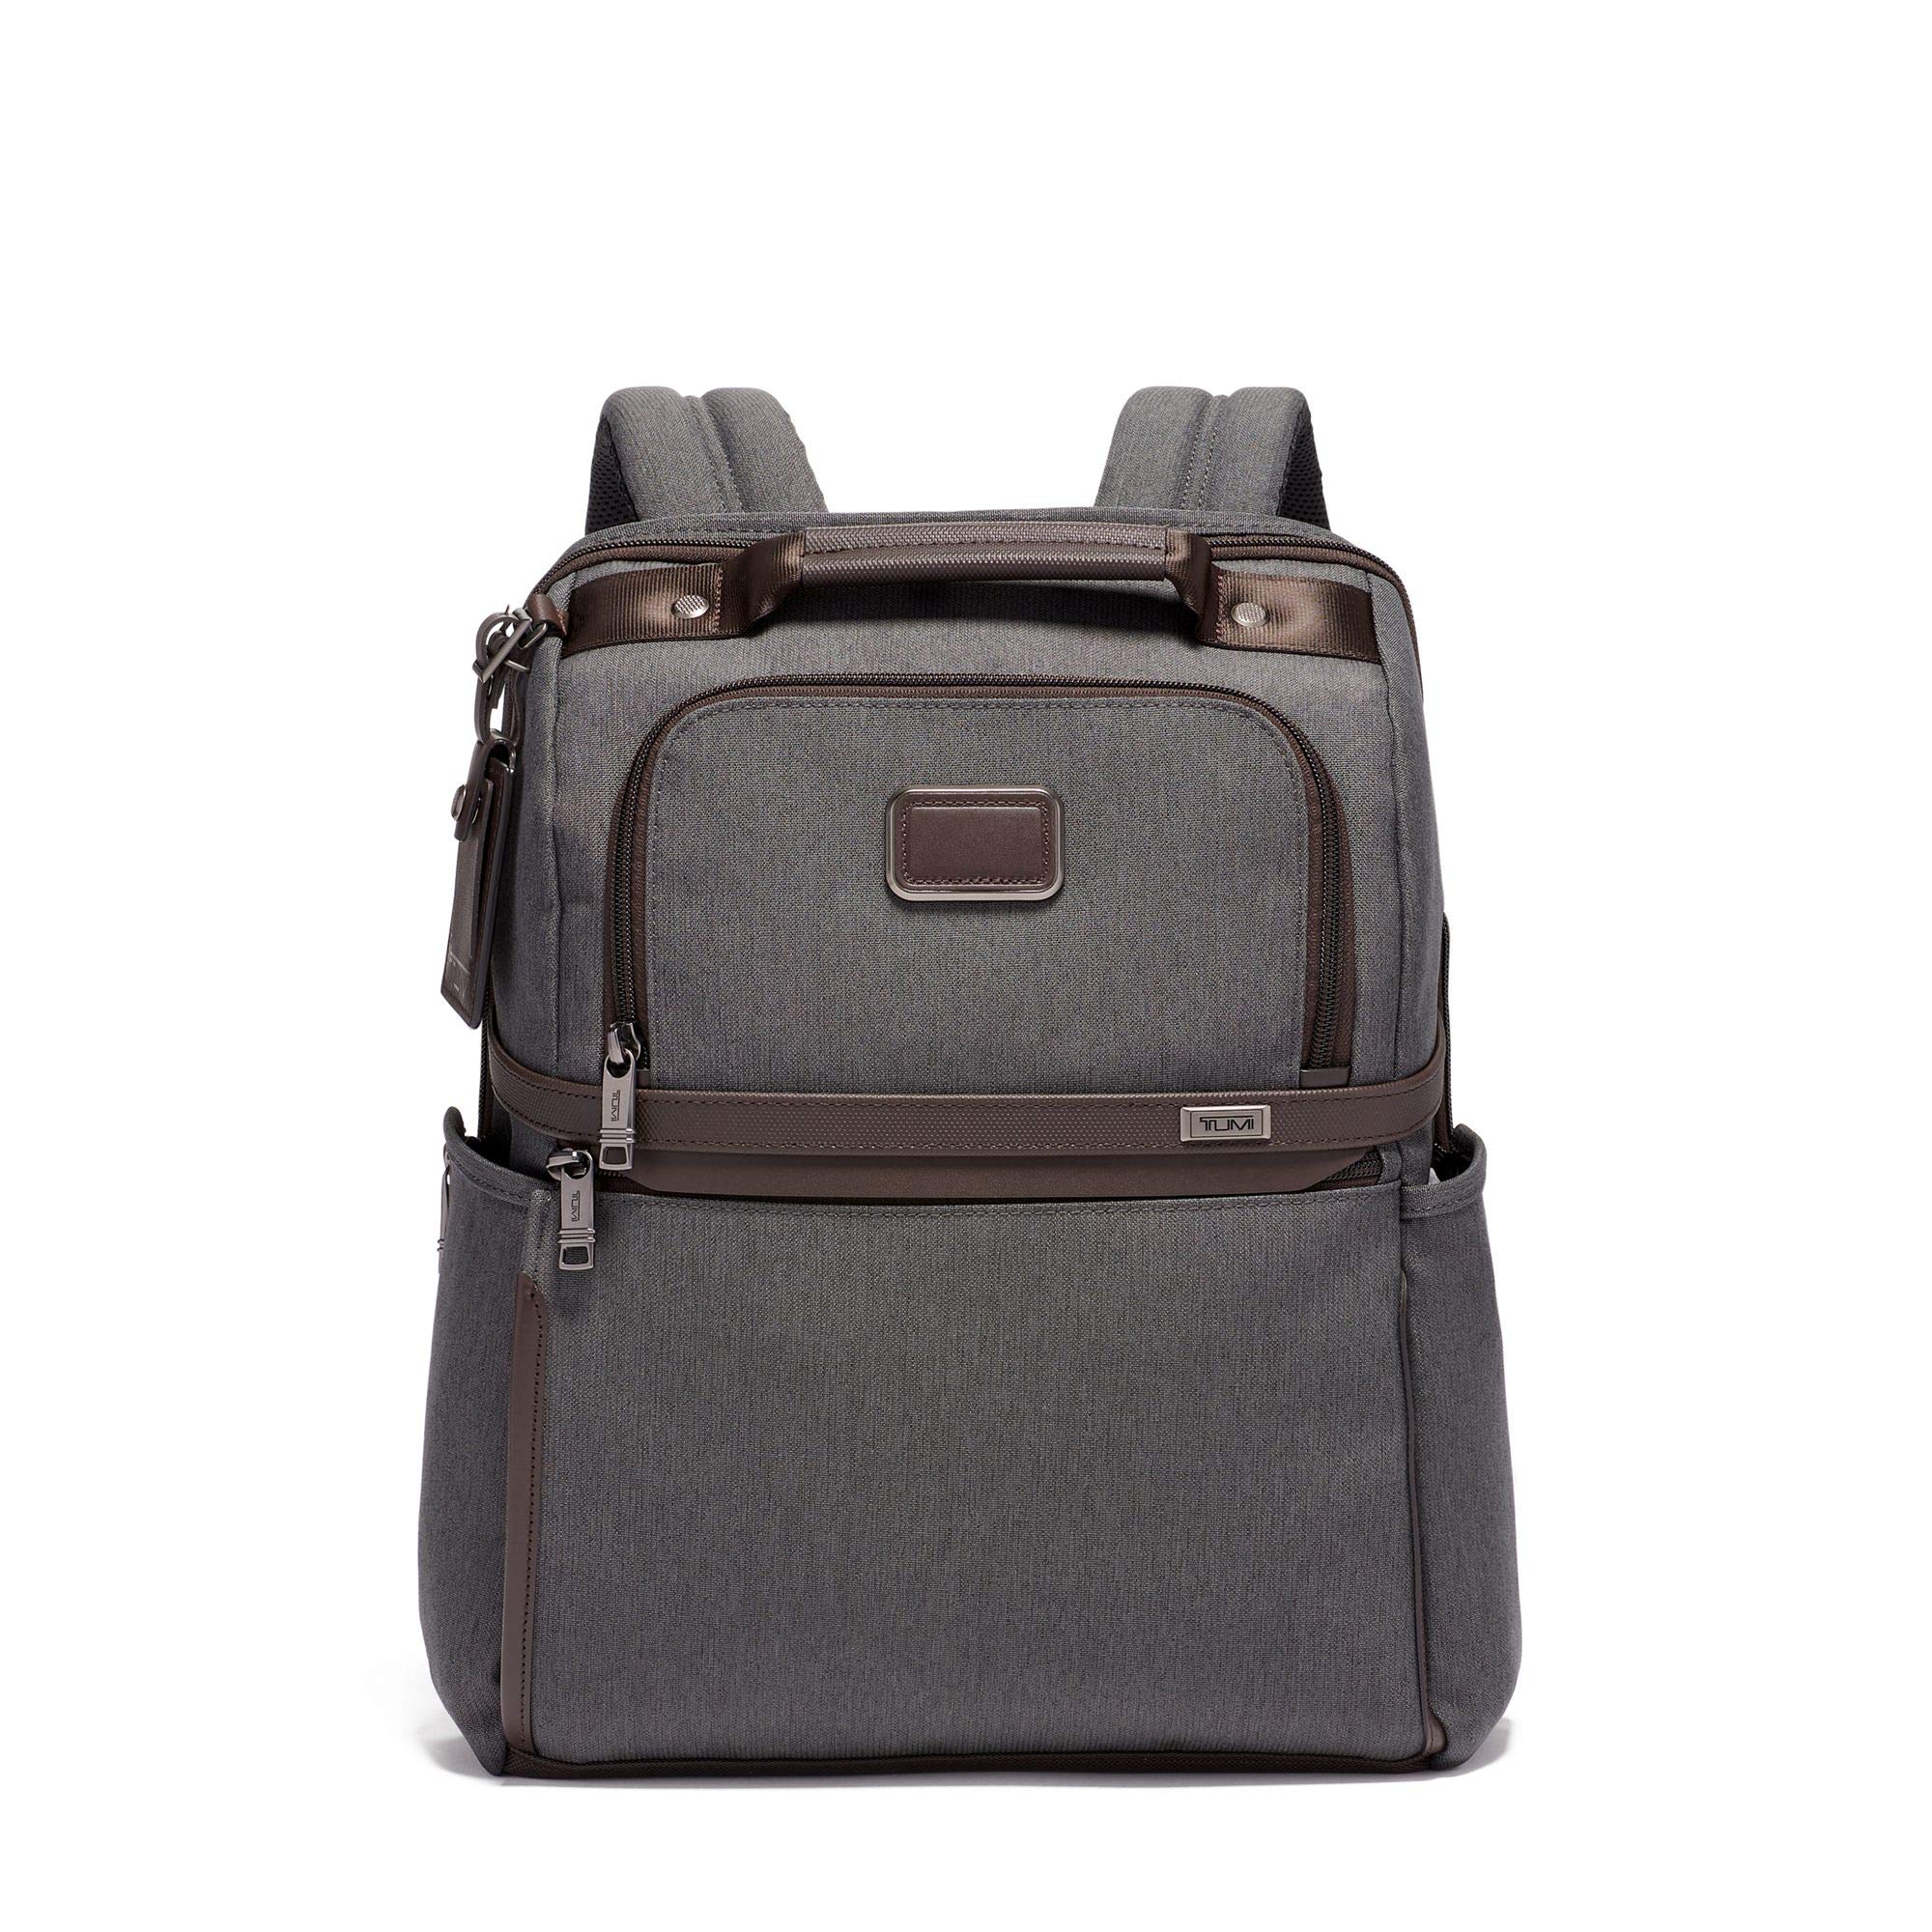 TUMI - Alpha 3 Slim Solutions Laptop Brief Pack - 15 Inch Computer 